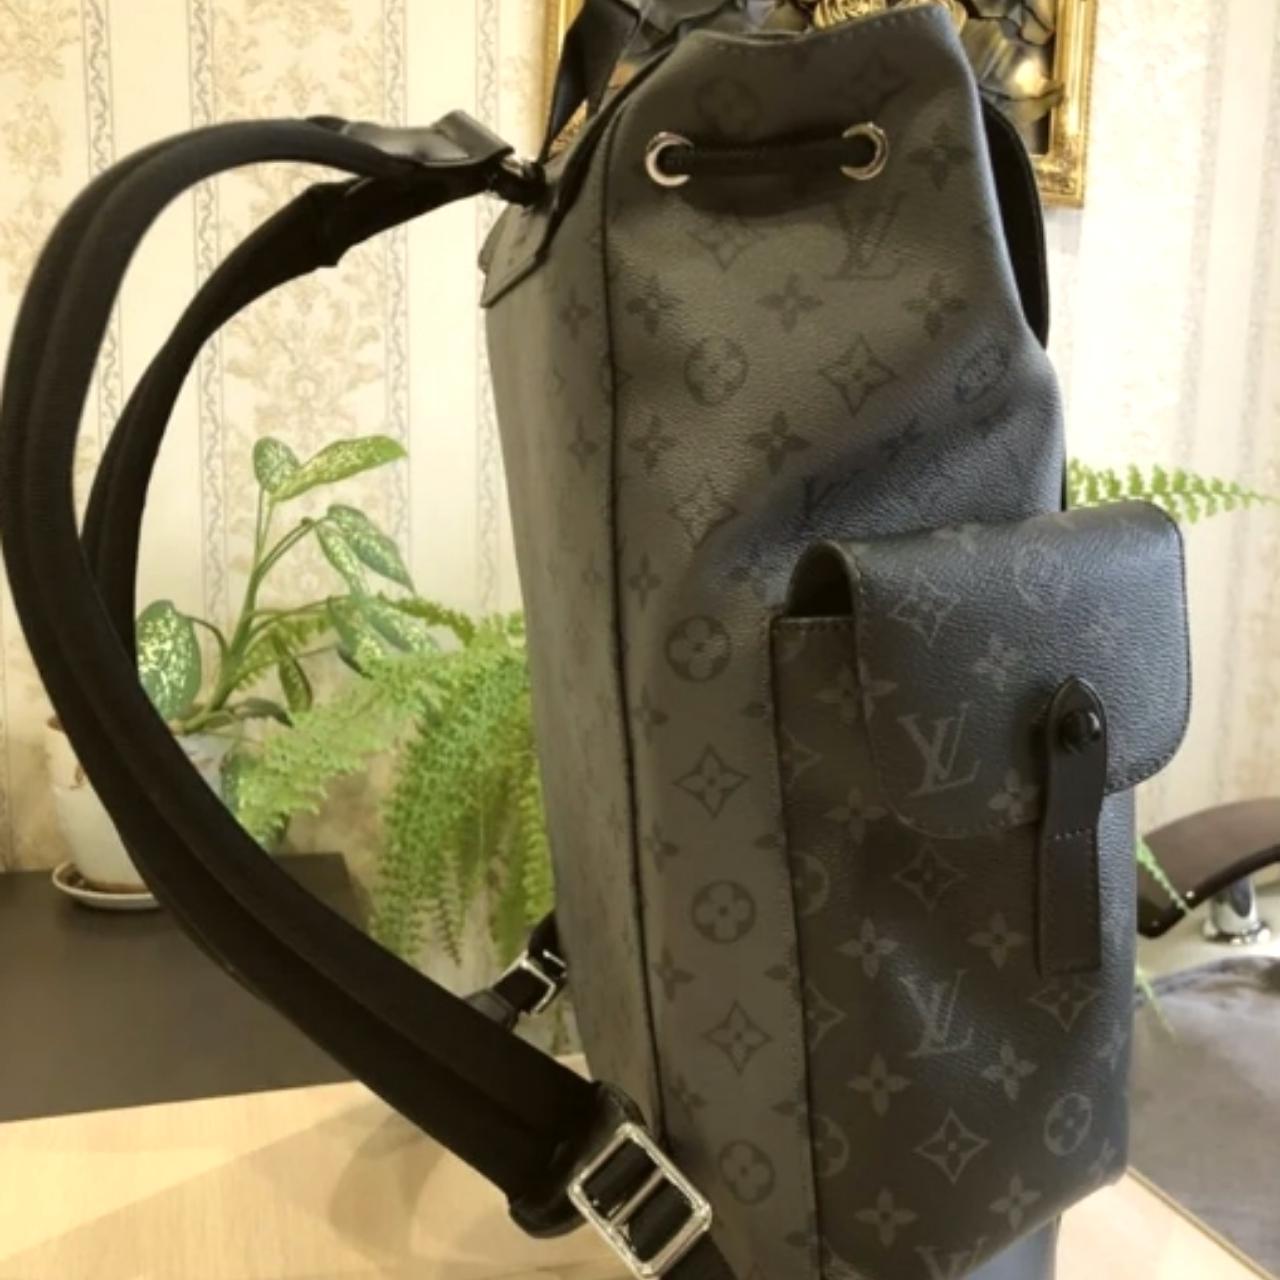 Selling my Louis Vuitton Christopher backpack.